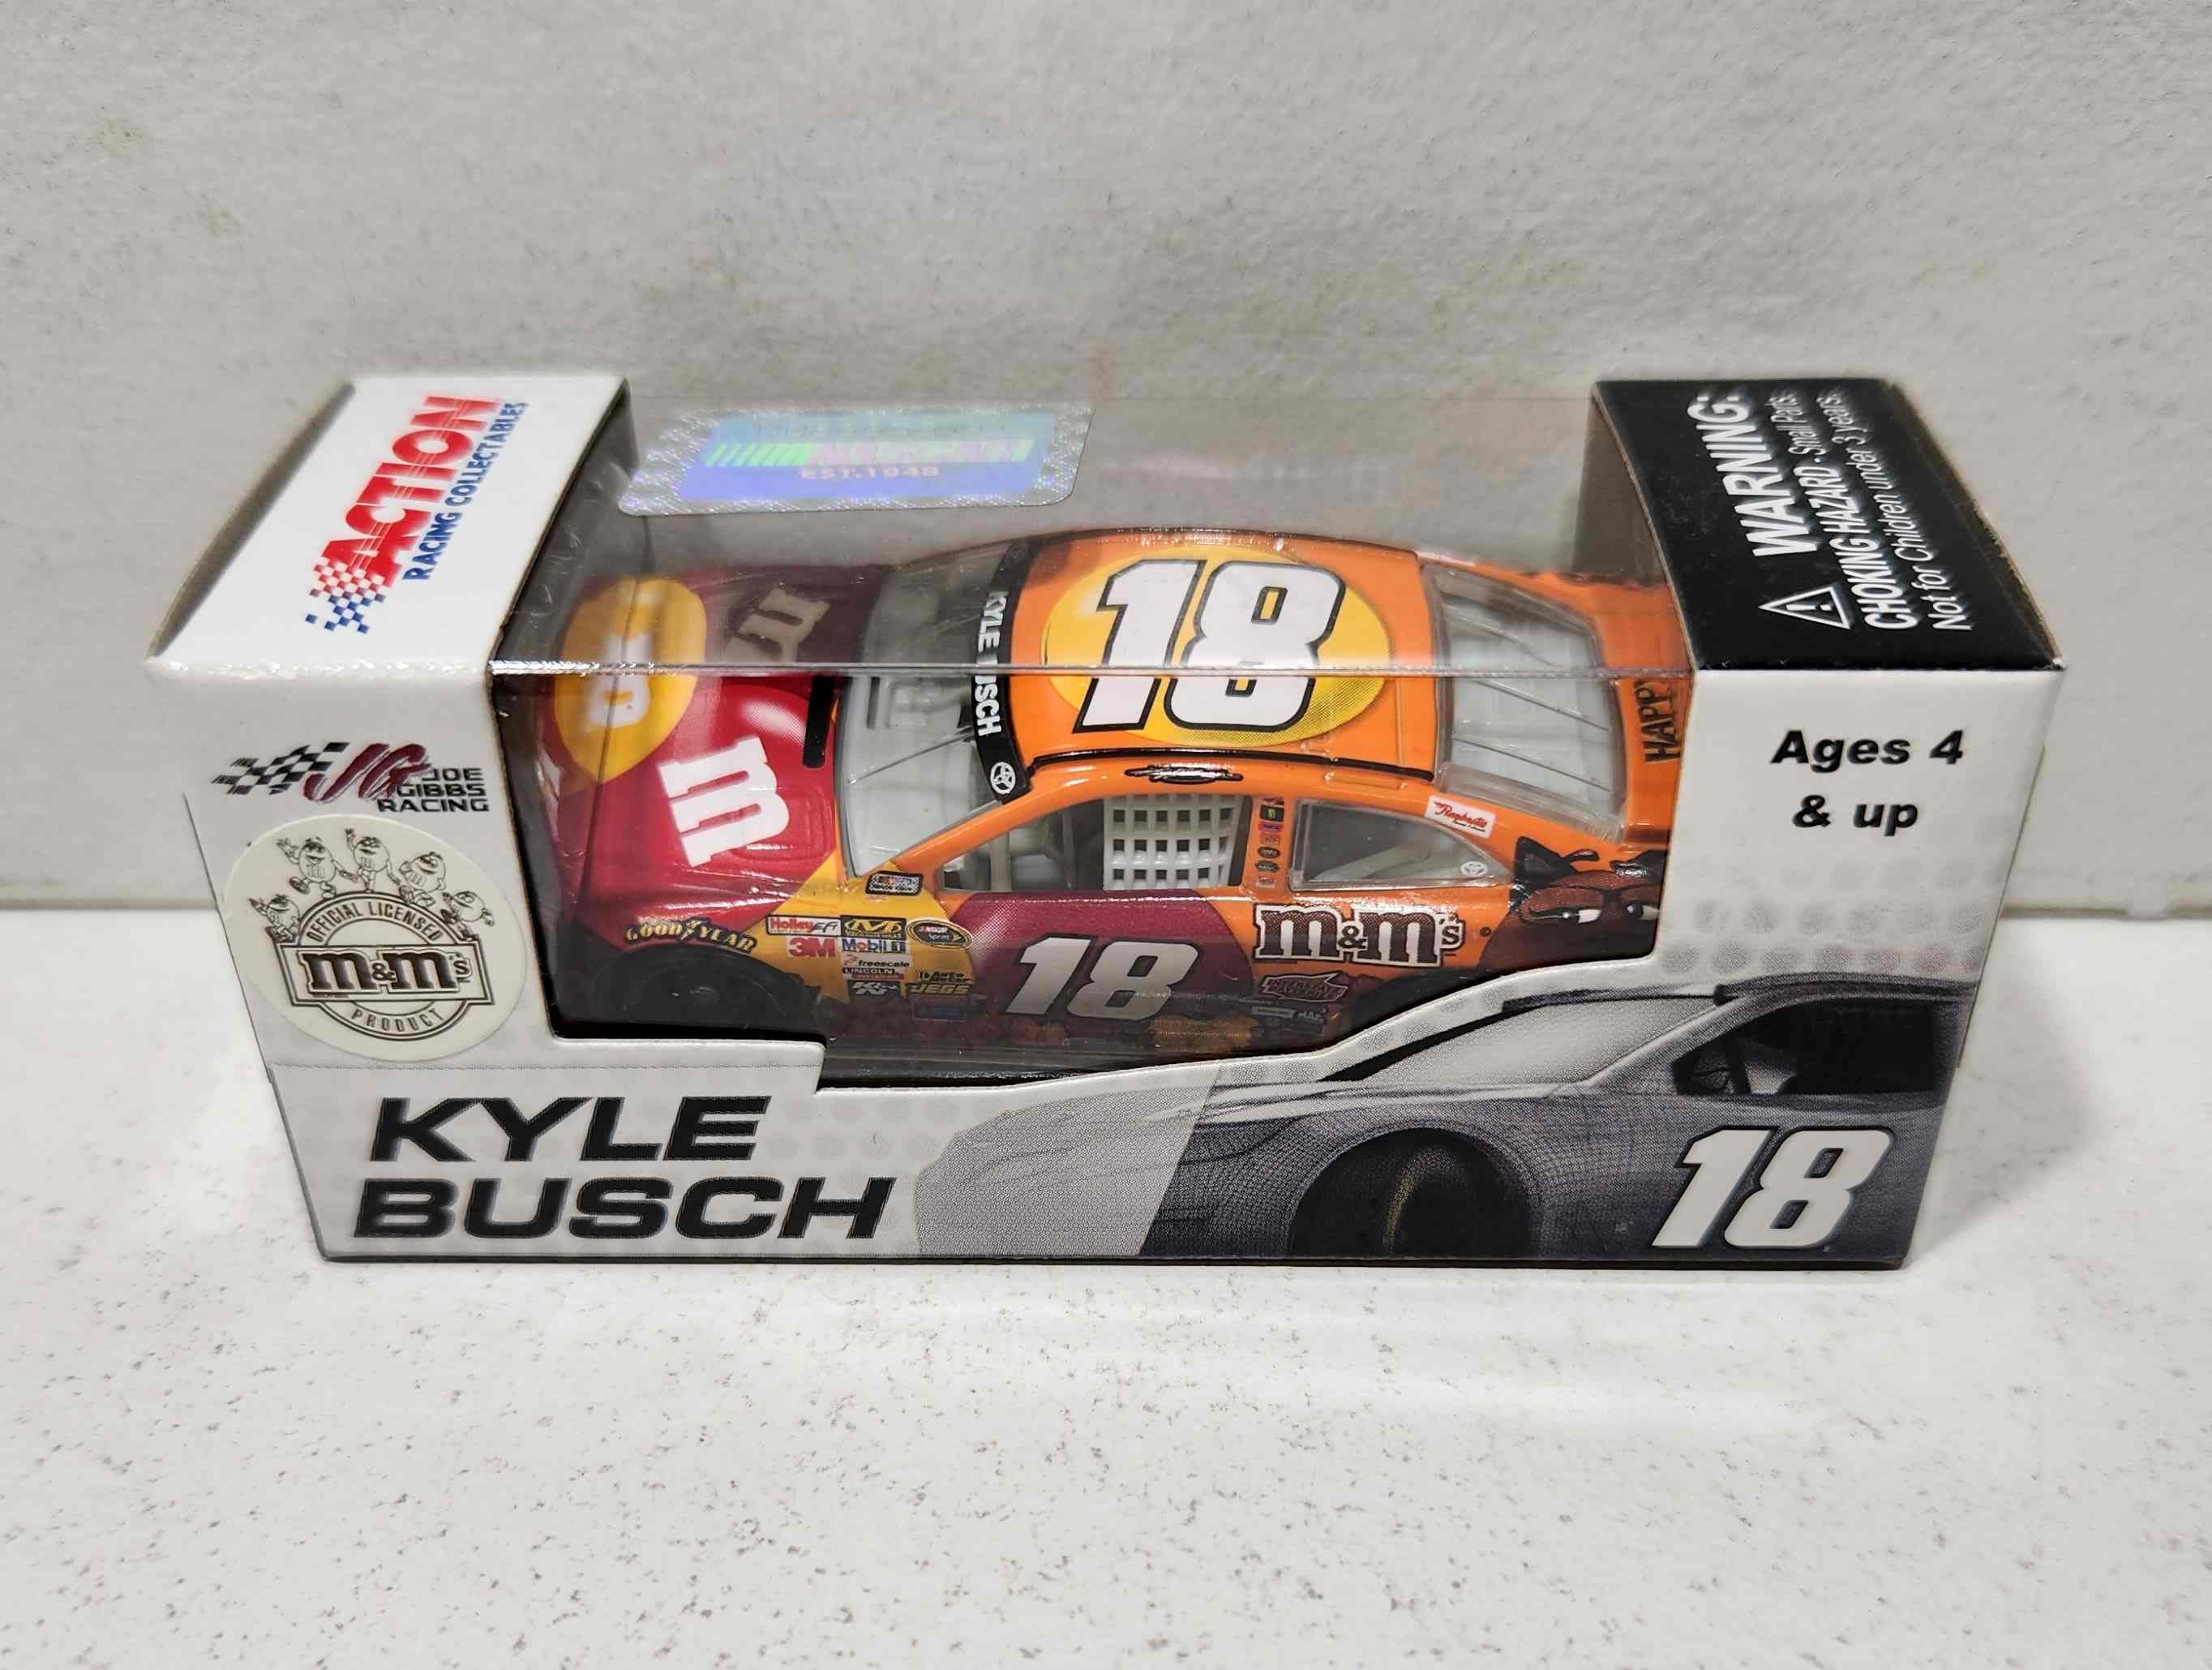 2013 Kyle Busch 1/64th M&M's "Halloween" Pitstop series Camry